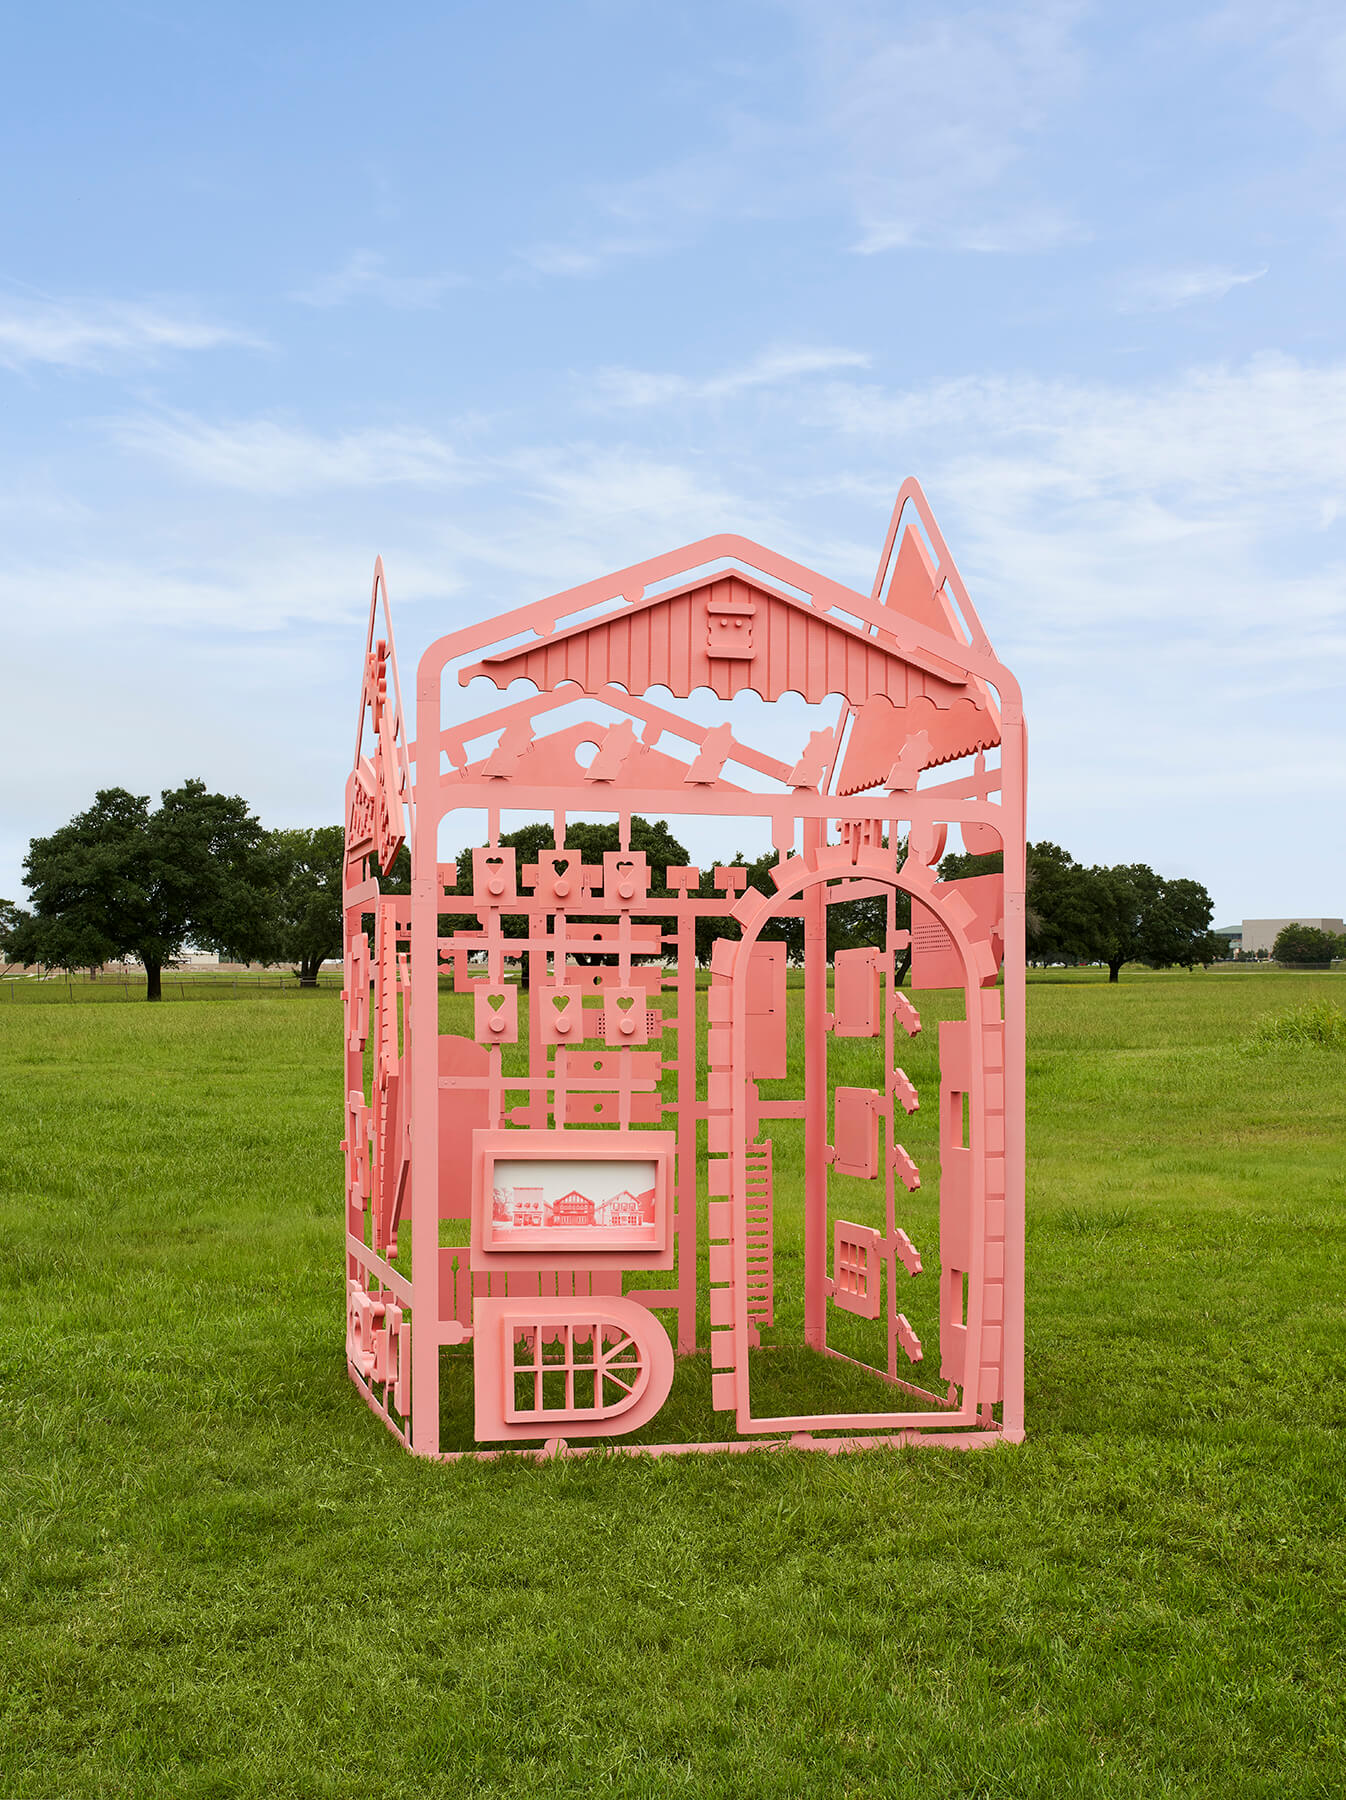 a color-coated installation, fabricating swissness, in a field of grass